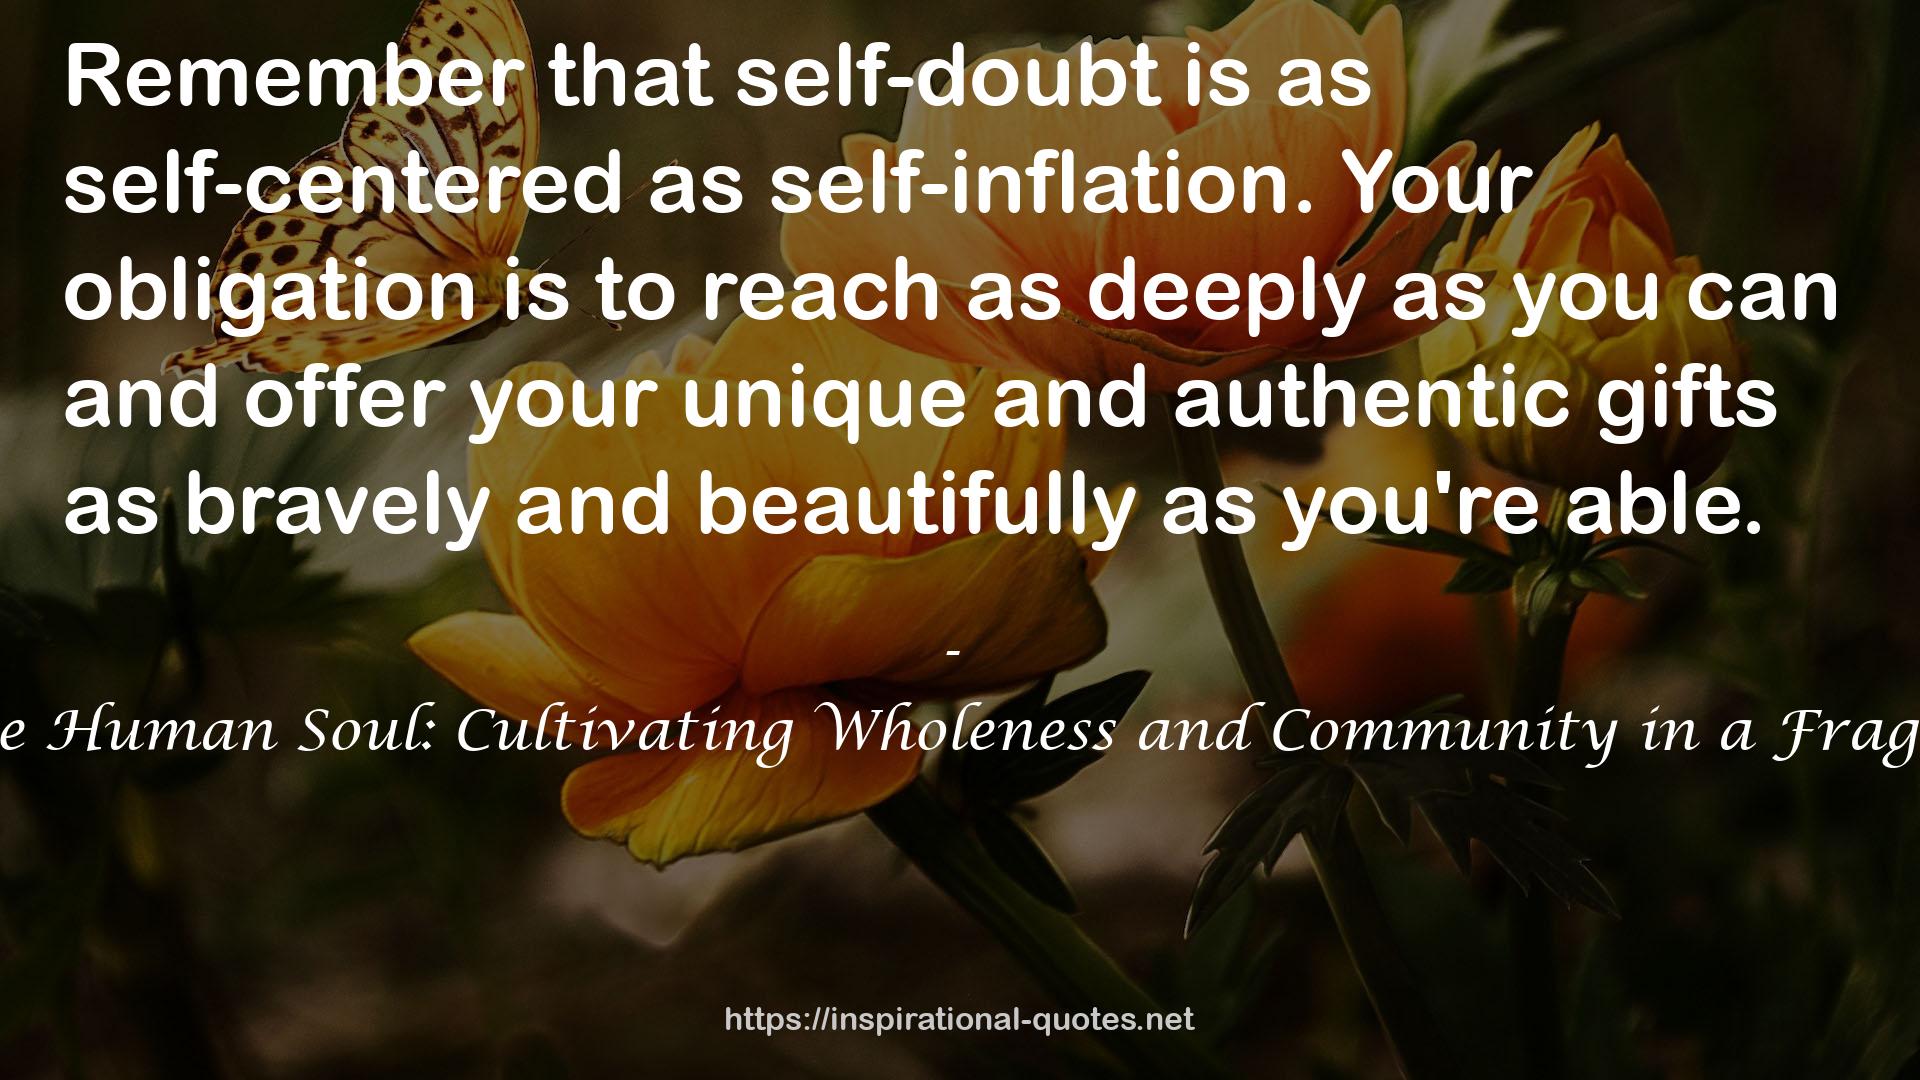 Nature and the Human Soul: Cultivating Wholeness and Community in a Fragmented World QUOTES